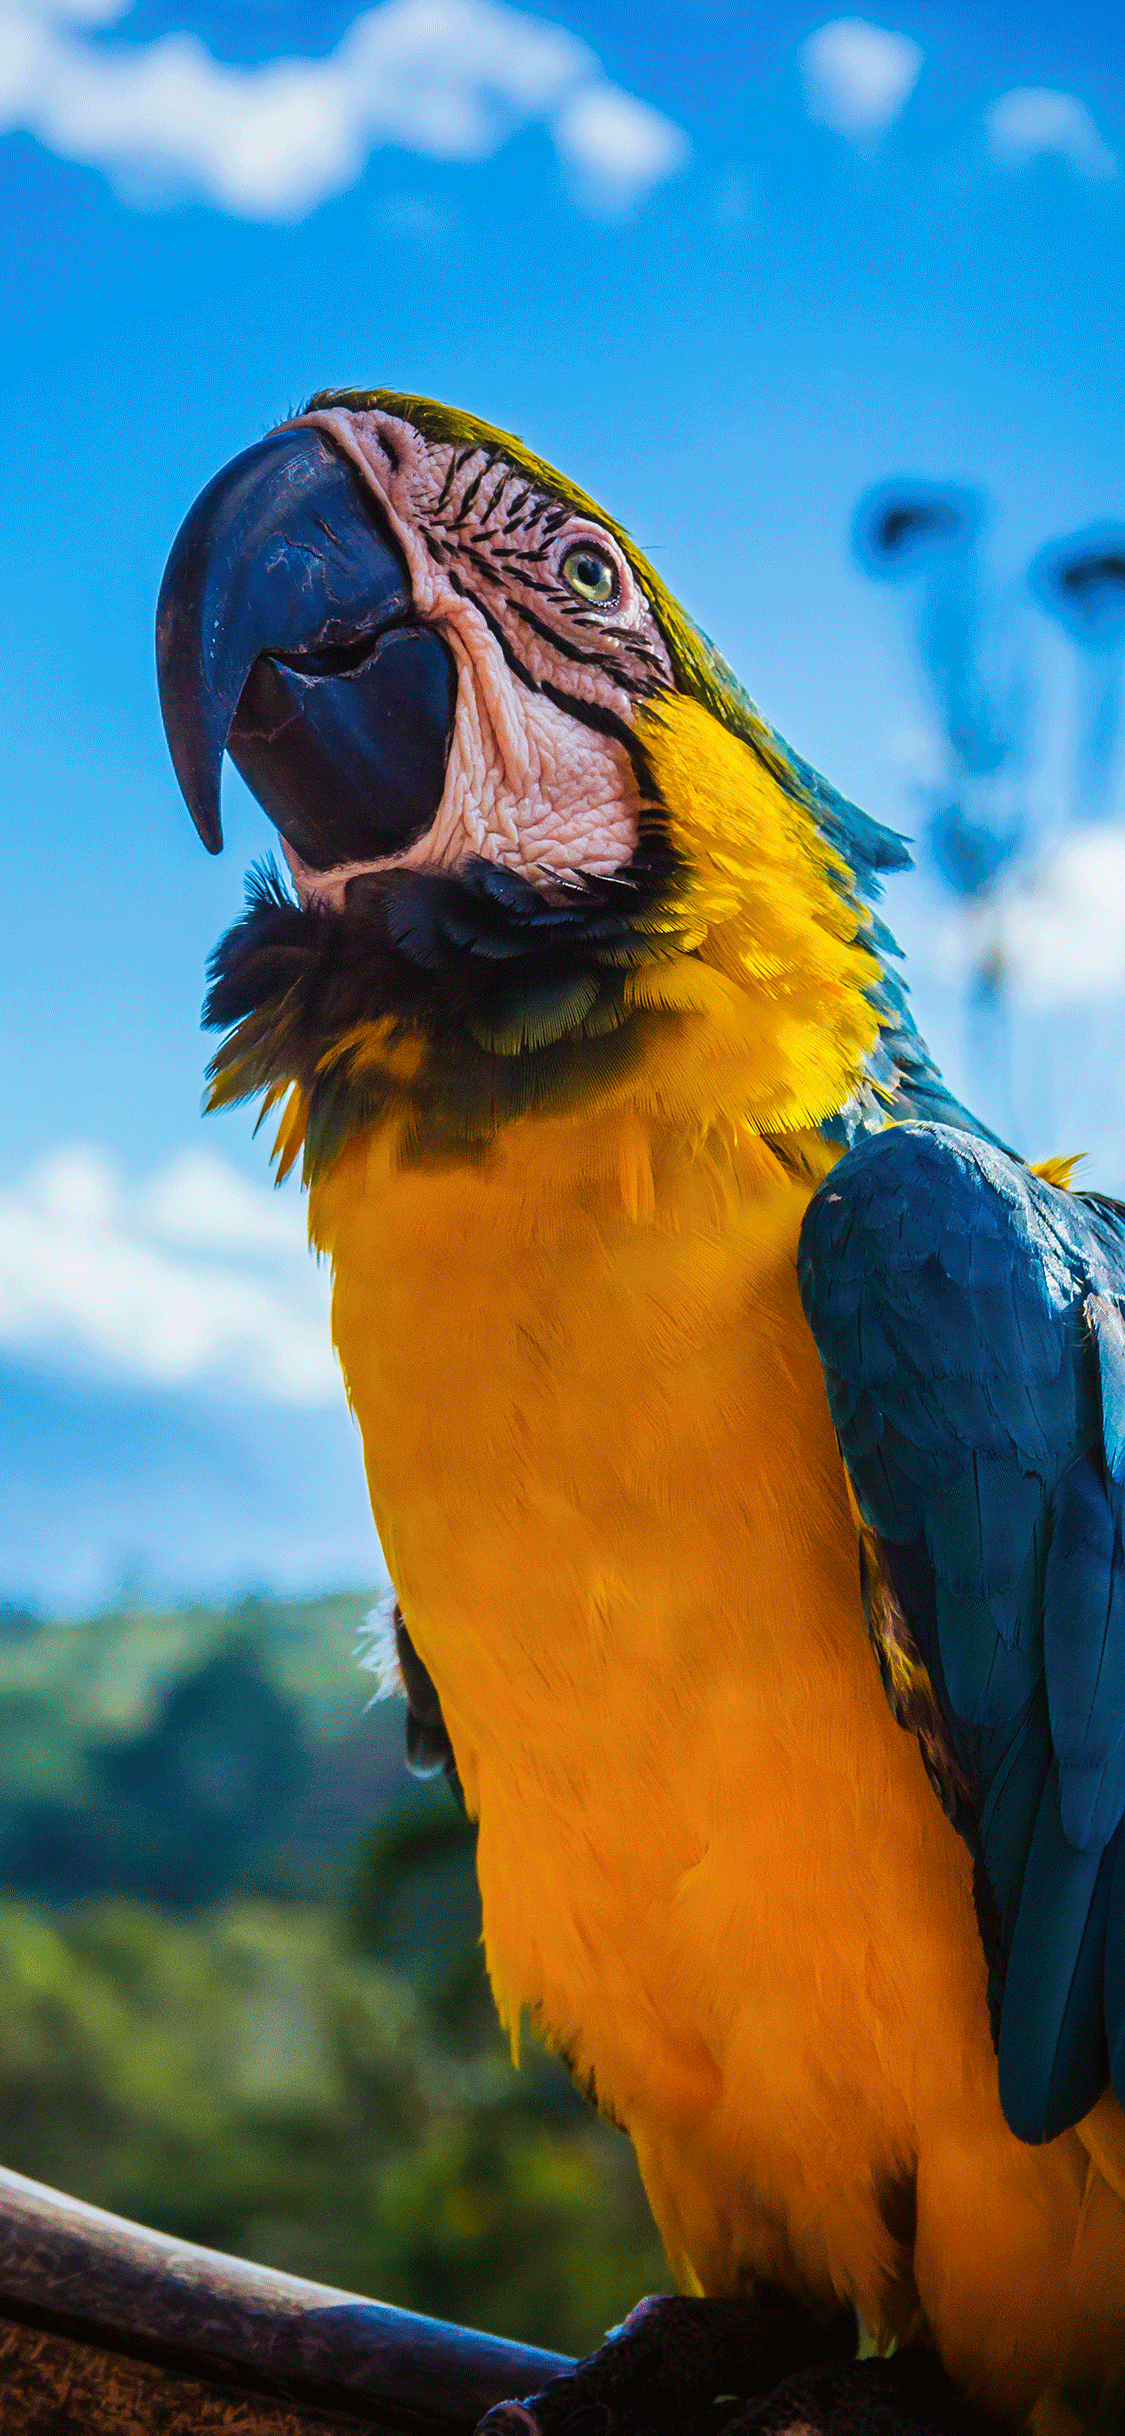 1125x2436 Parrot Wallpaper for iPhone 11, Pro Max, X, 8, 7, 6 Free Download on 3Wallpapers